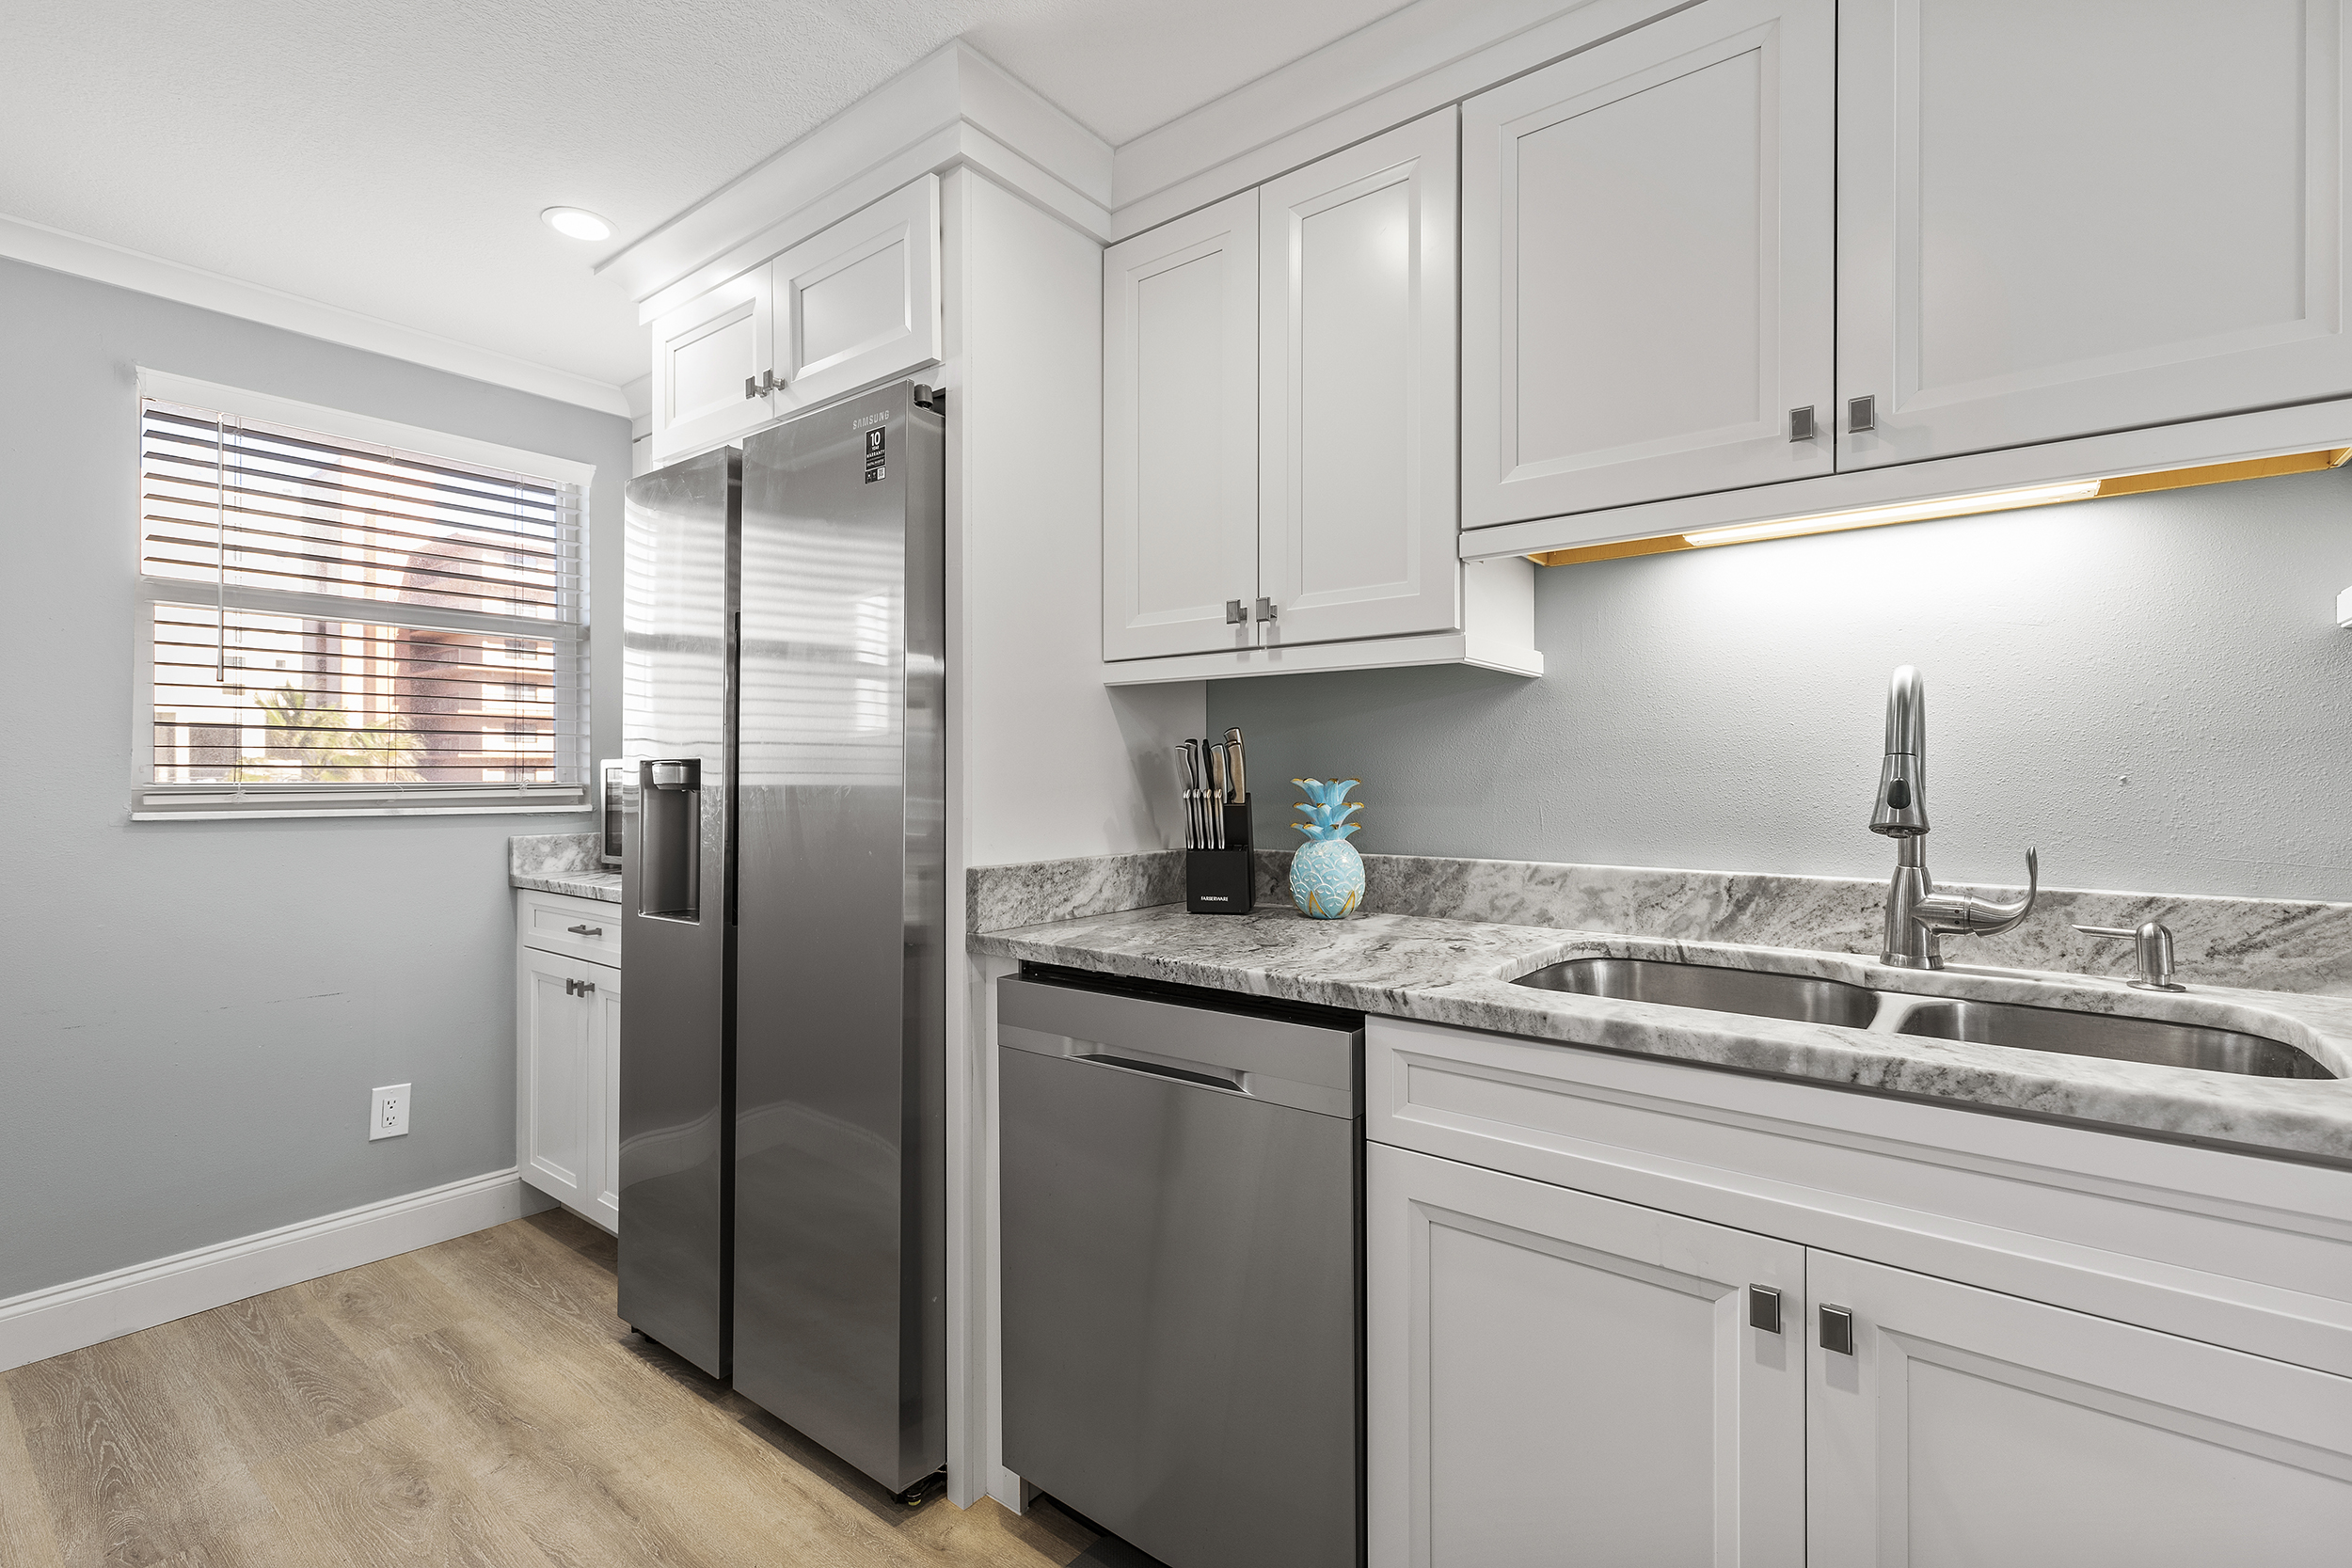 Stainless Steel Appliances in the Kitchen